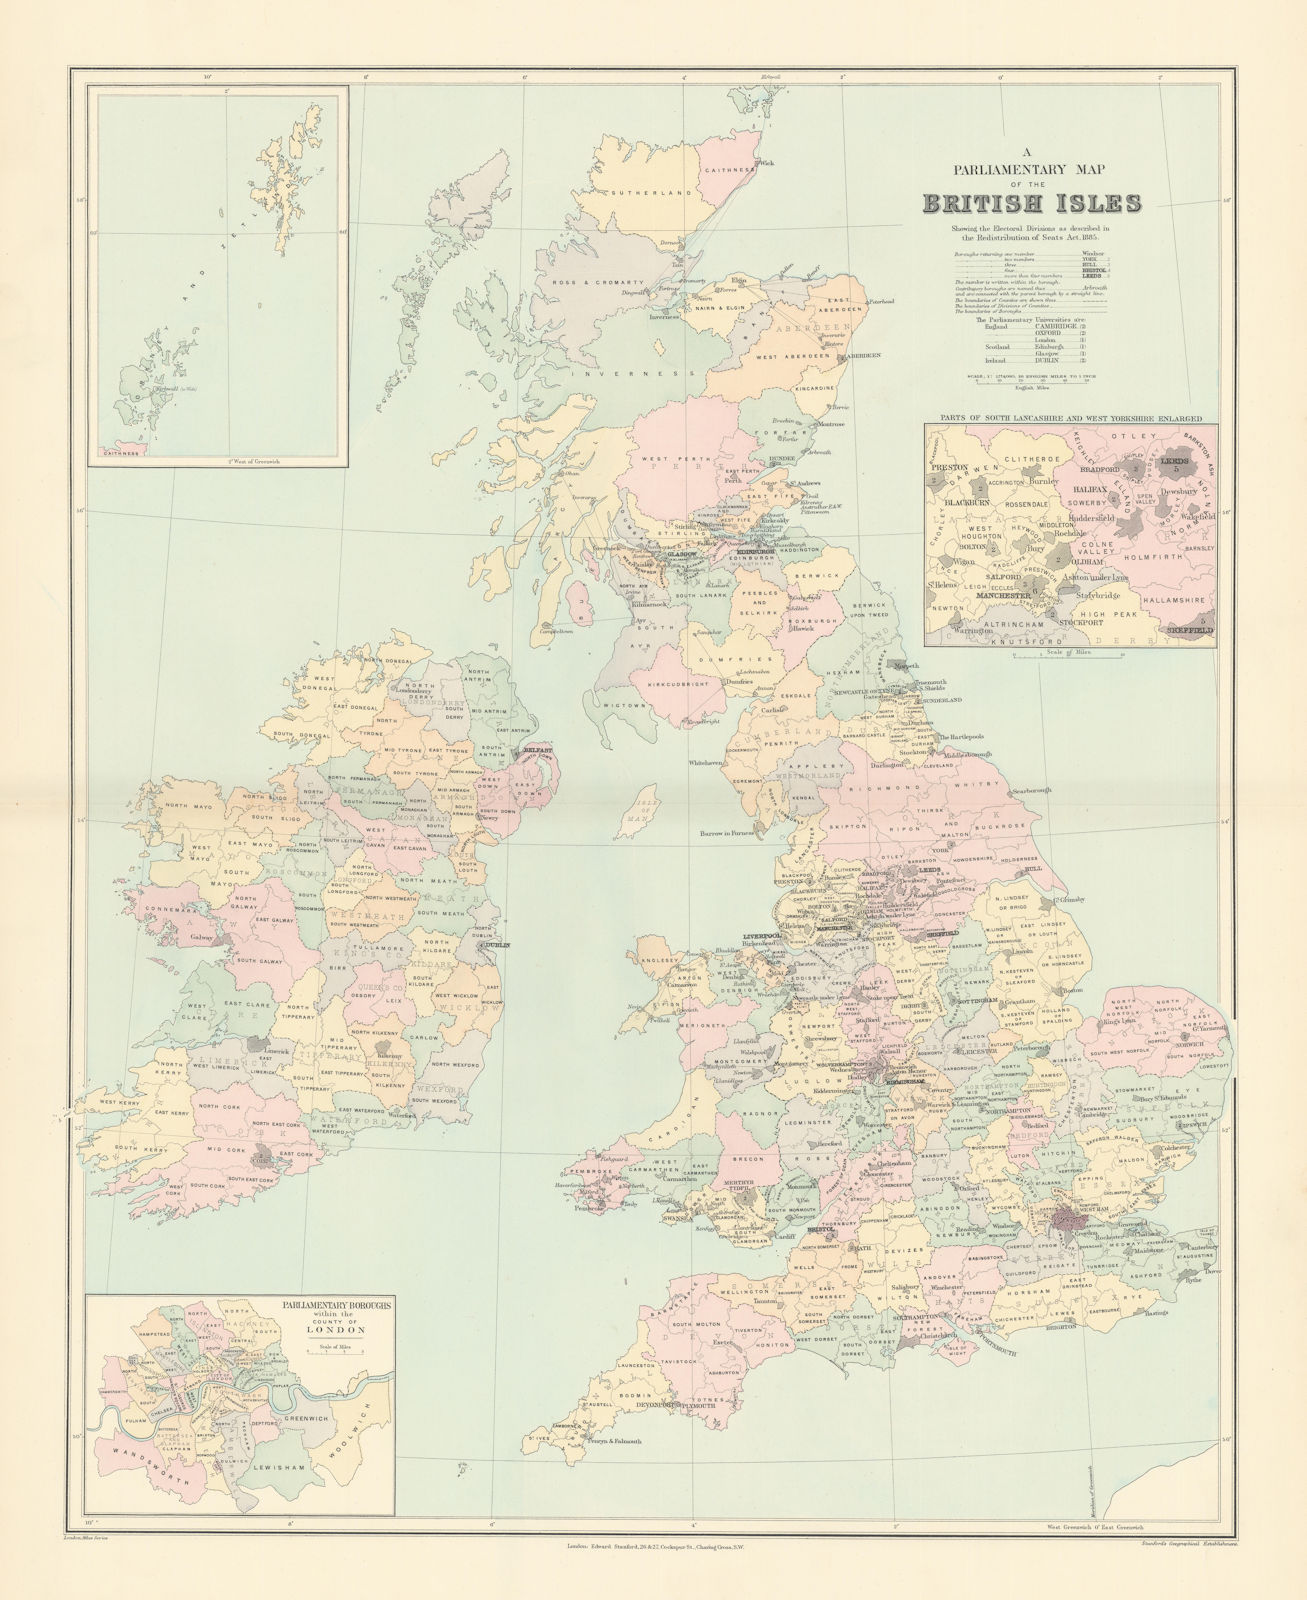 British Isles Parliamentary constituencies. Large 64x51cm. STANFORD 1896 map